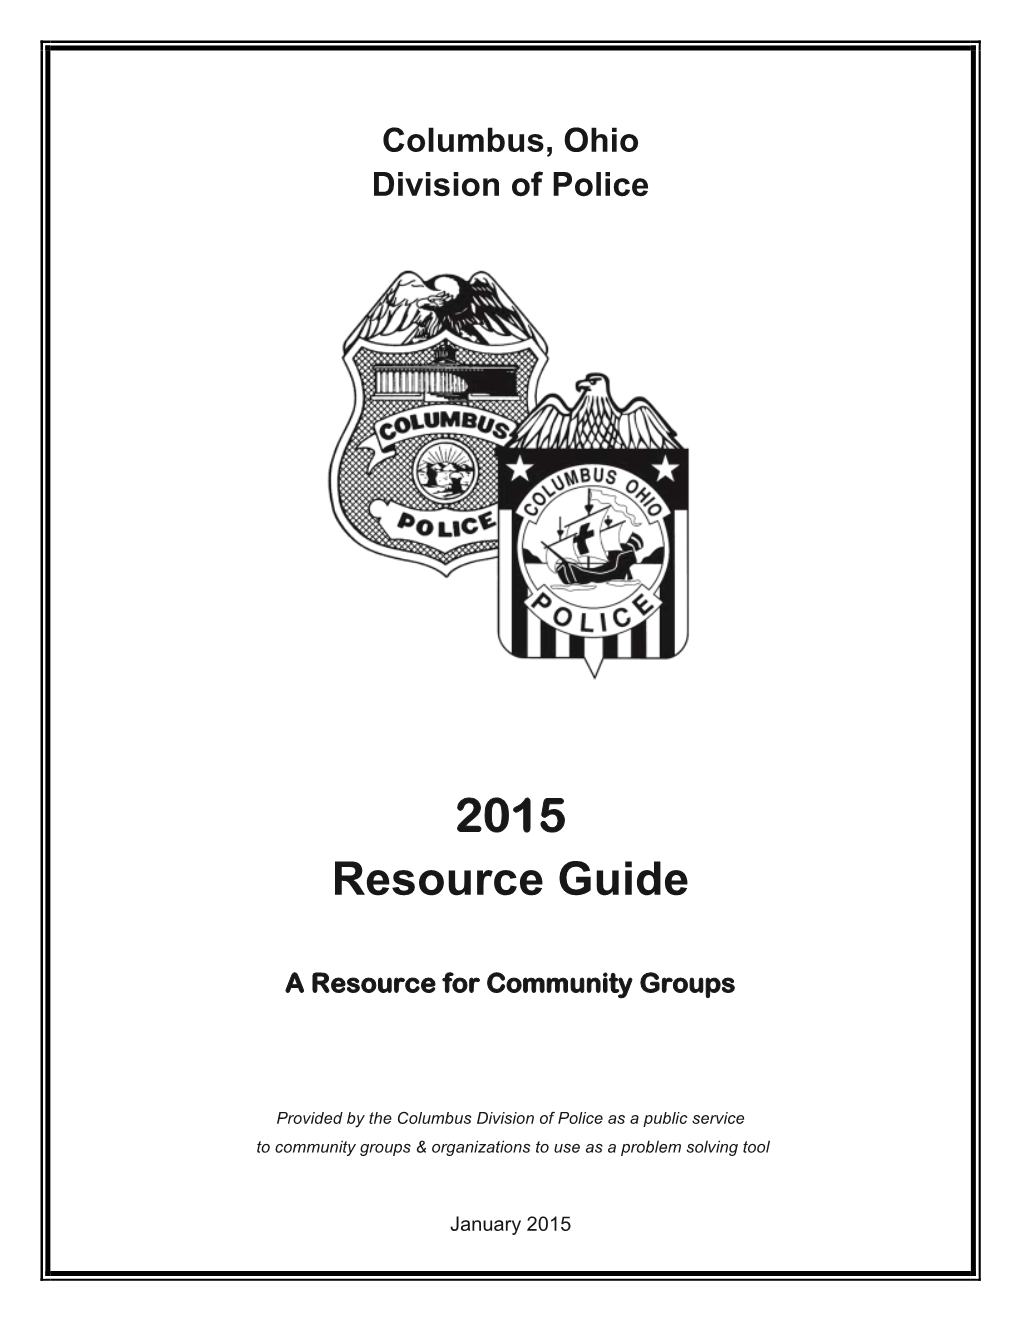 2015 Resource Guide